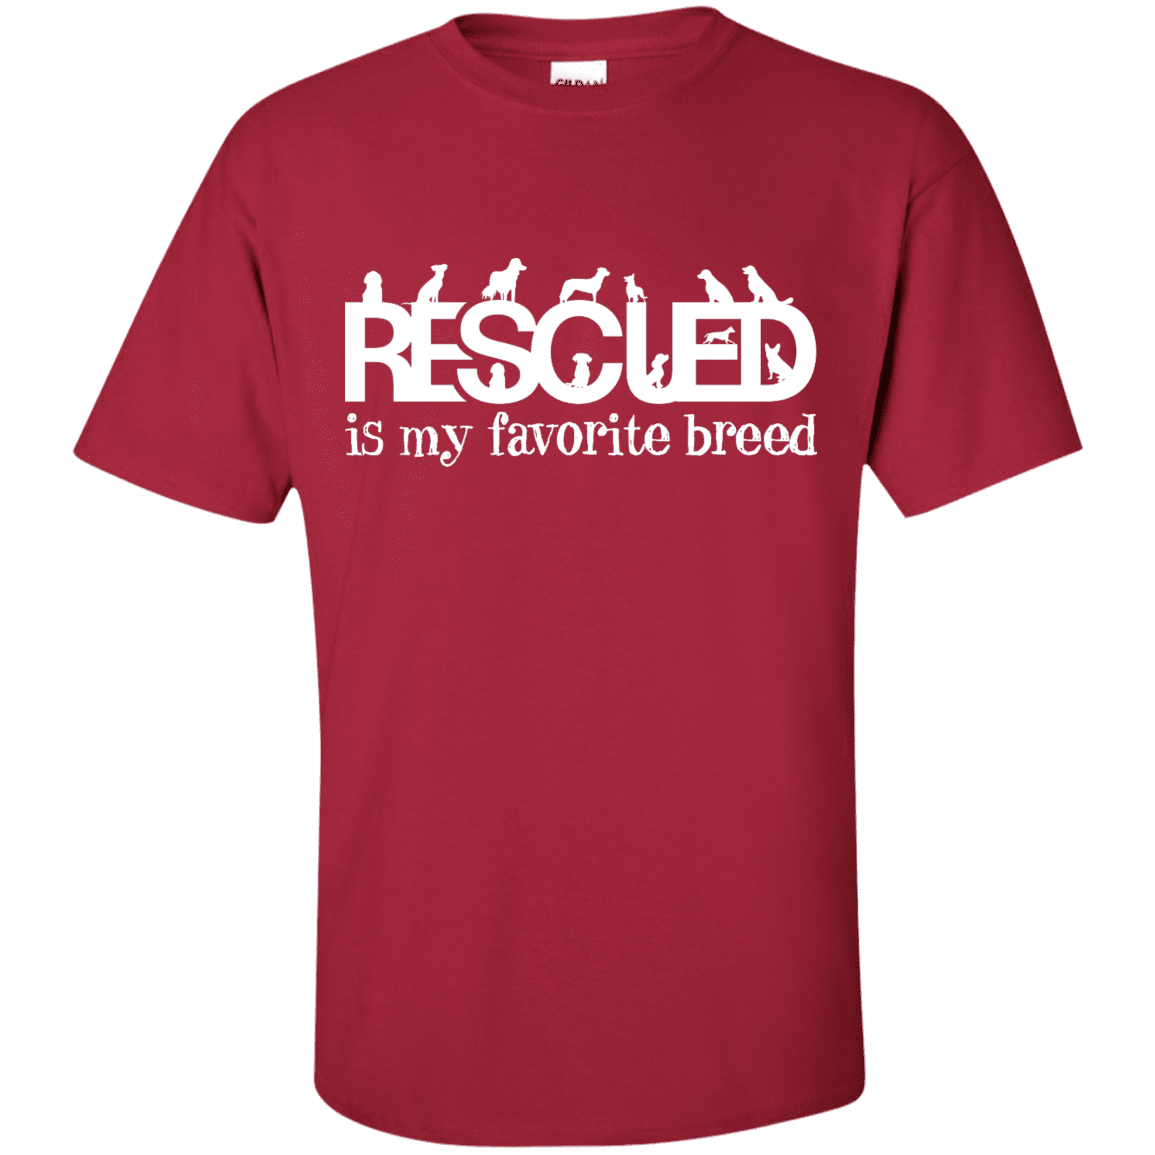 Rescued Is My Favorite Breed - T Shirt.